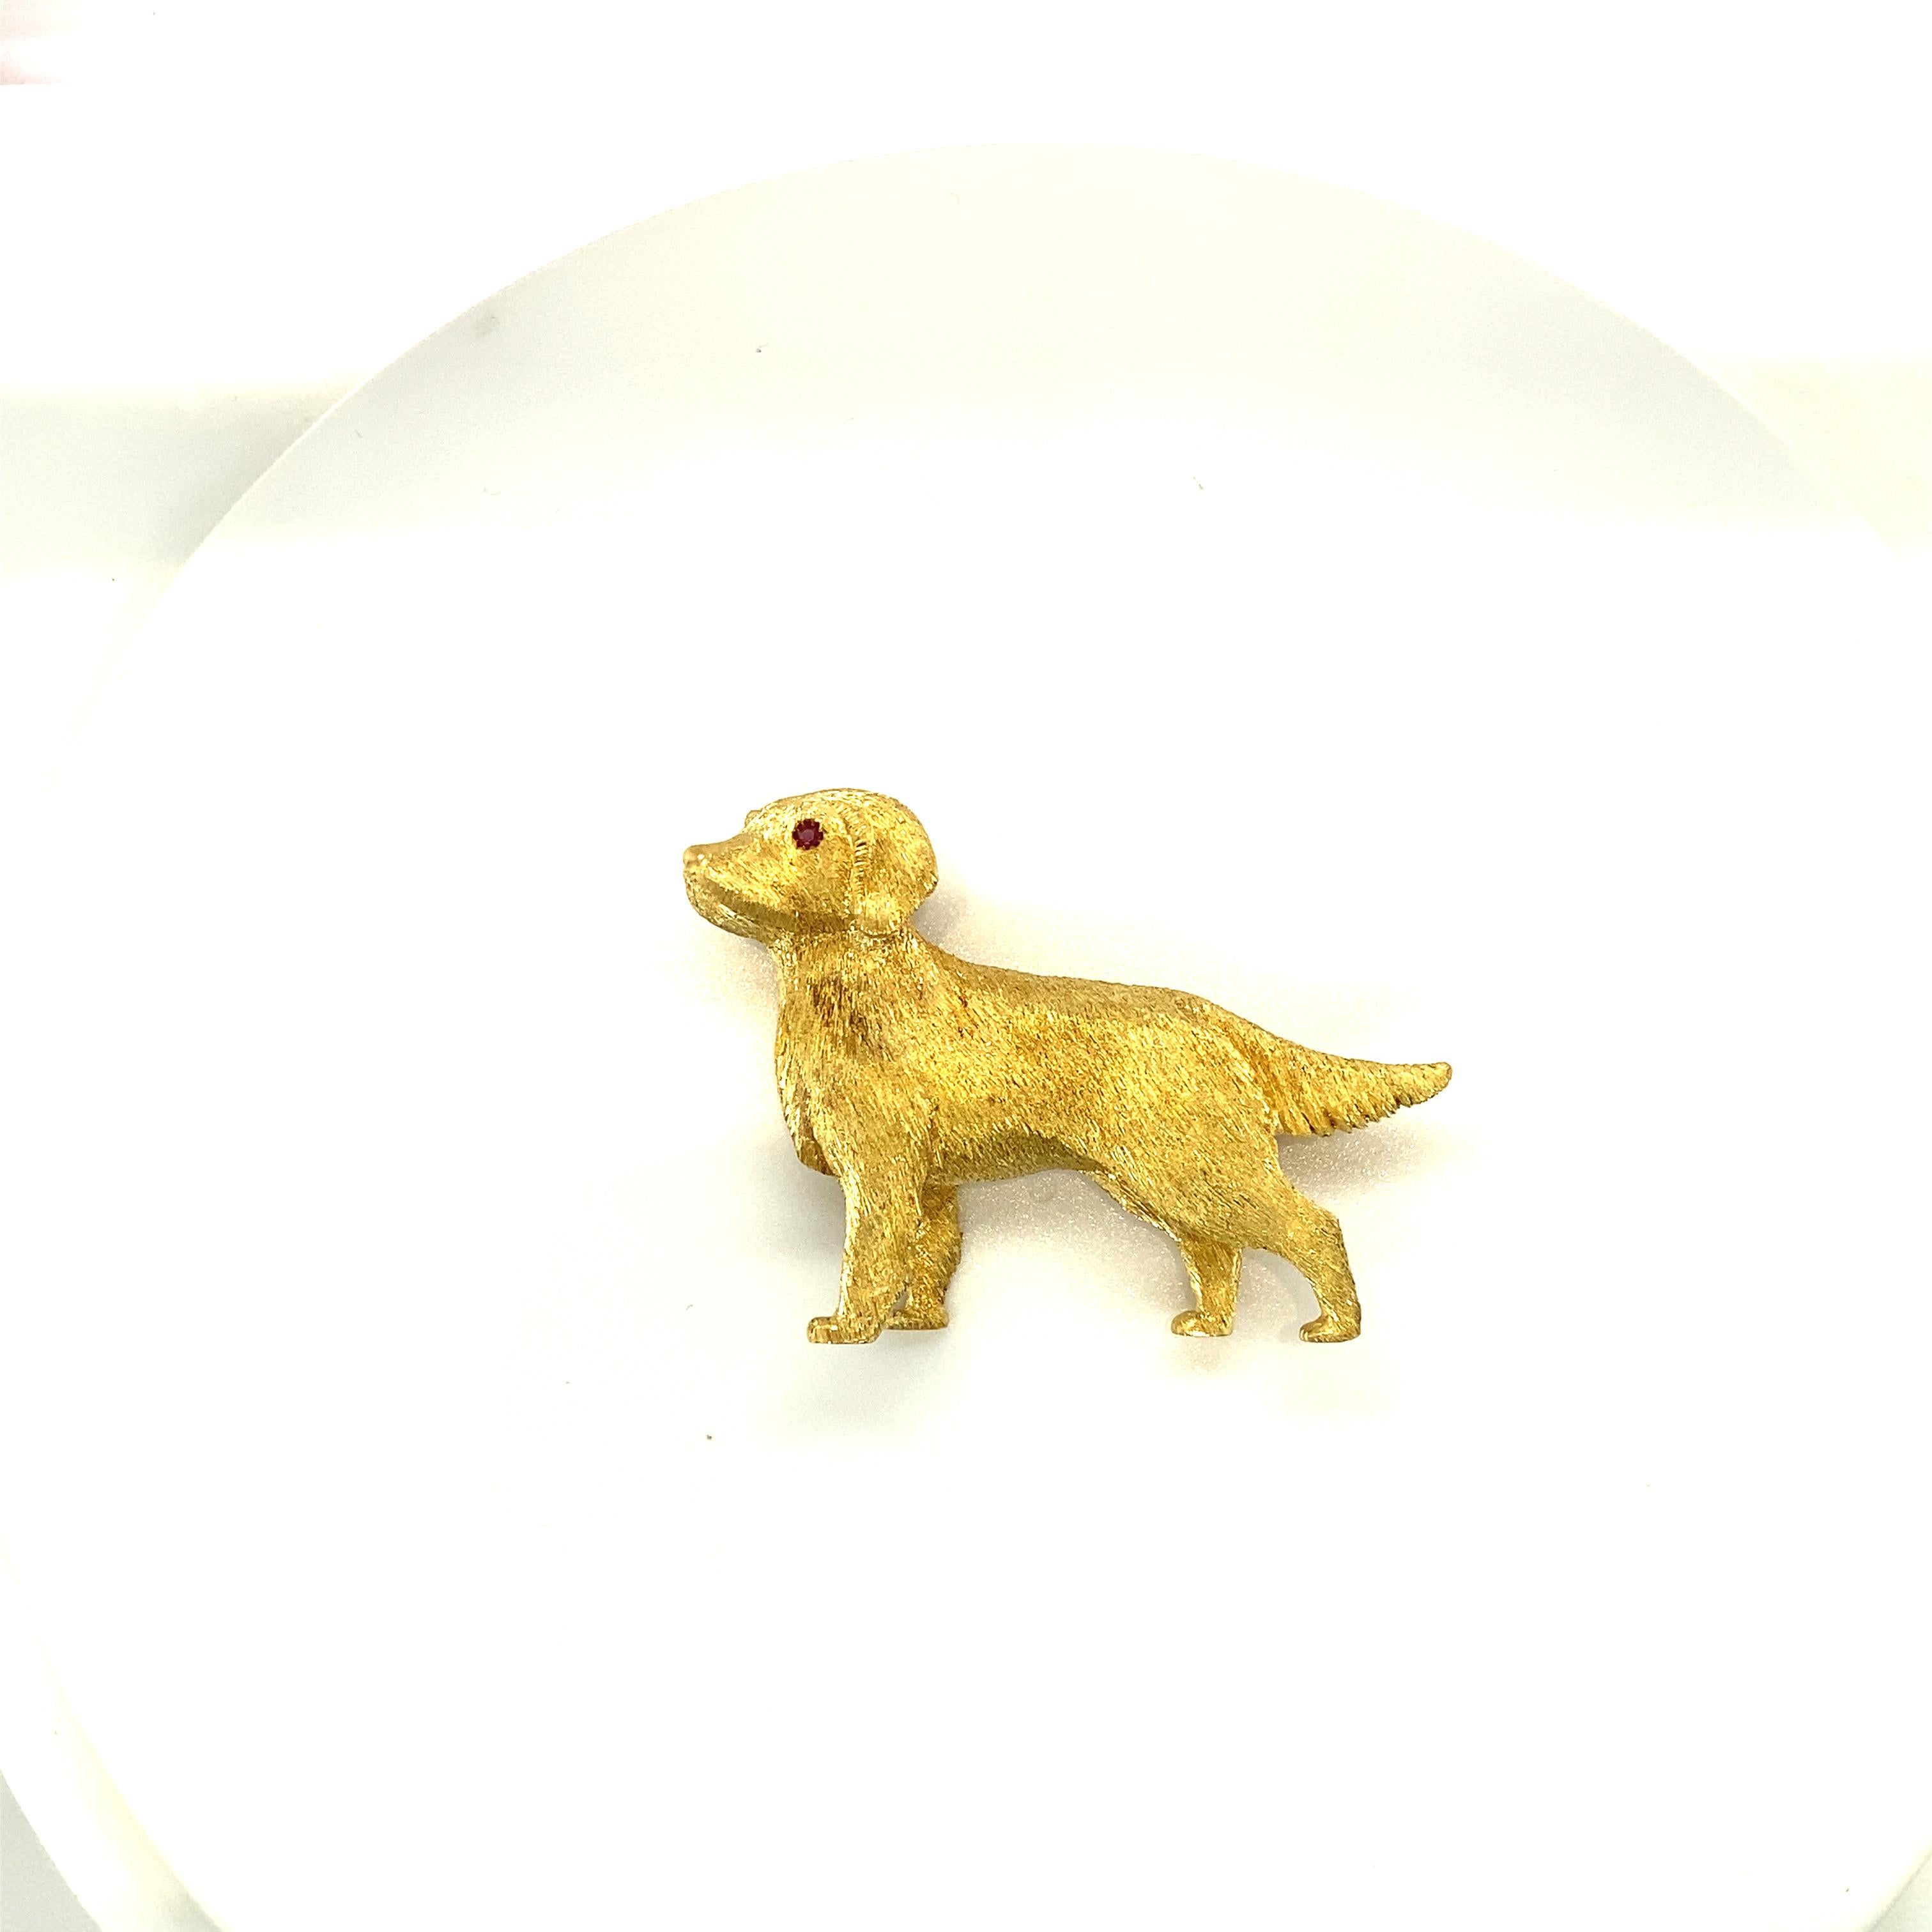 This 18 karat yellow gold Labrador Retrieverbrooch is crafted in an etched satin finish. The pup's eyes are set with round brilliant rubies. The brooch measures 2